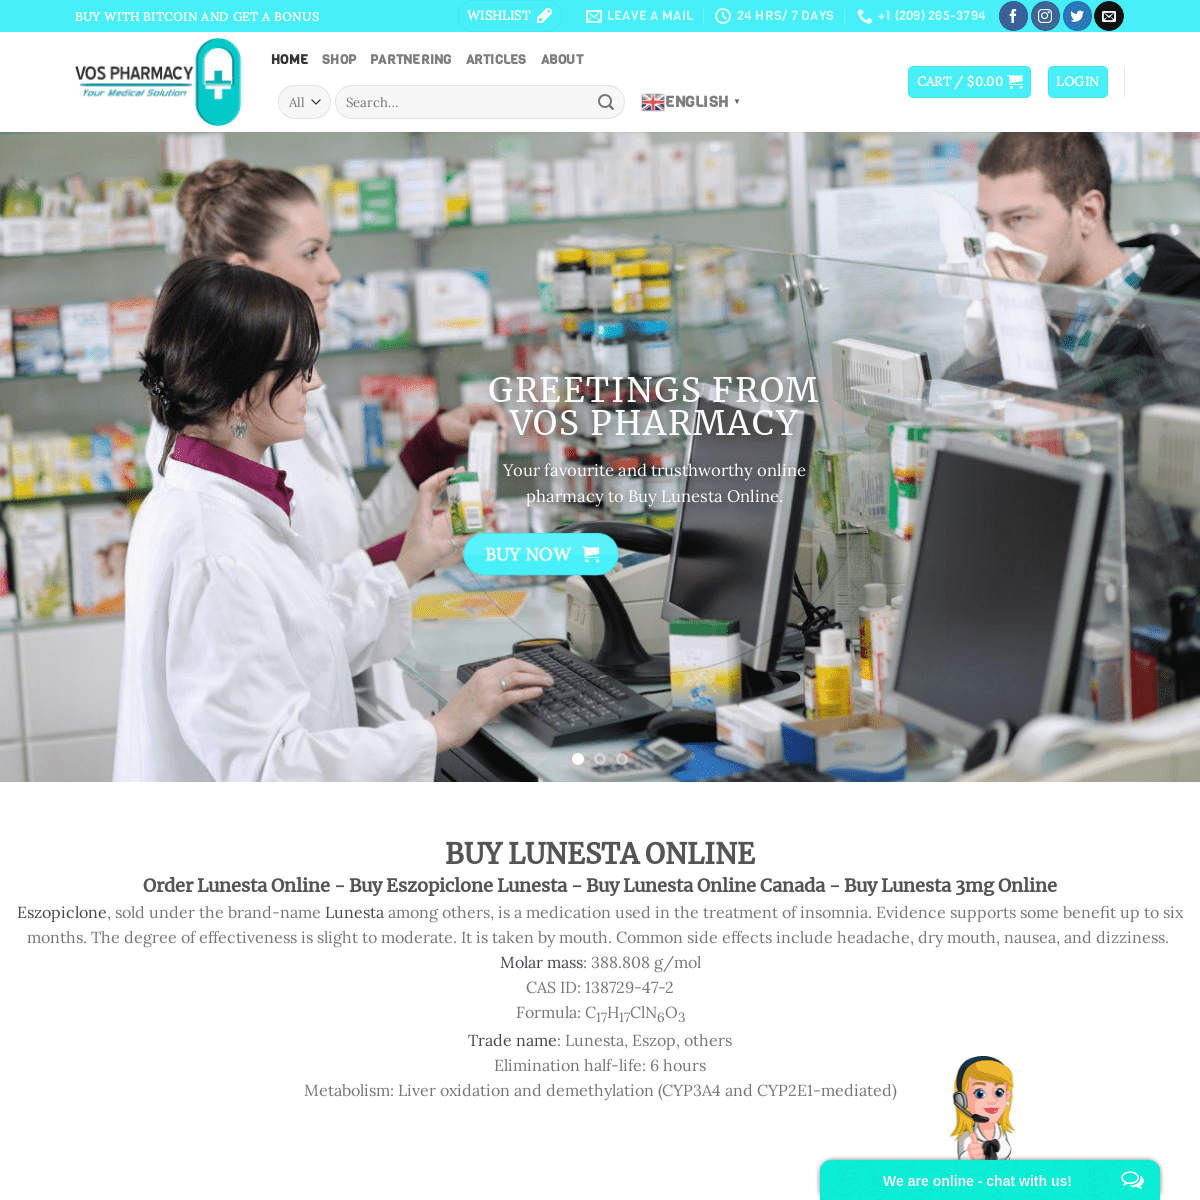 A complete backup of https://vospharmacy.com